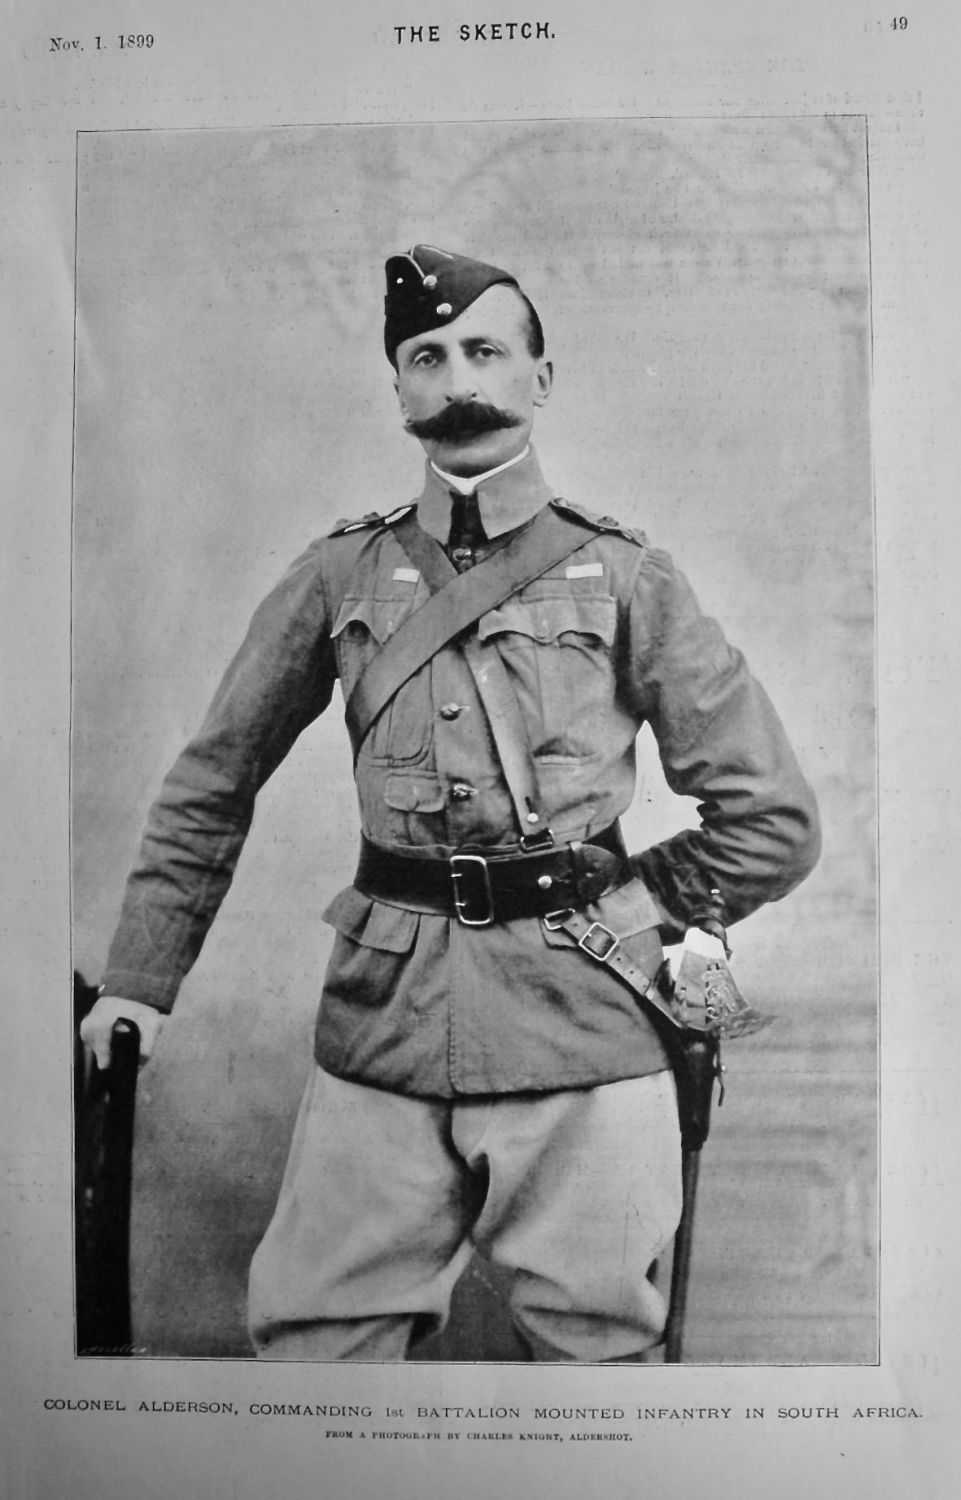 Colonel Alderson, Commanding 1st Battalion Mounted Infantry in South Africa